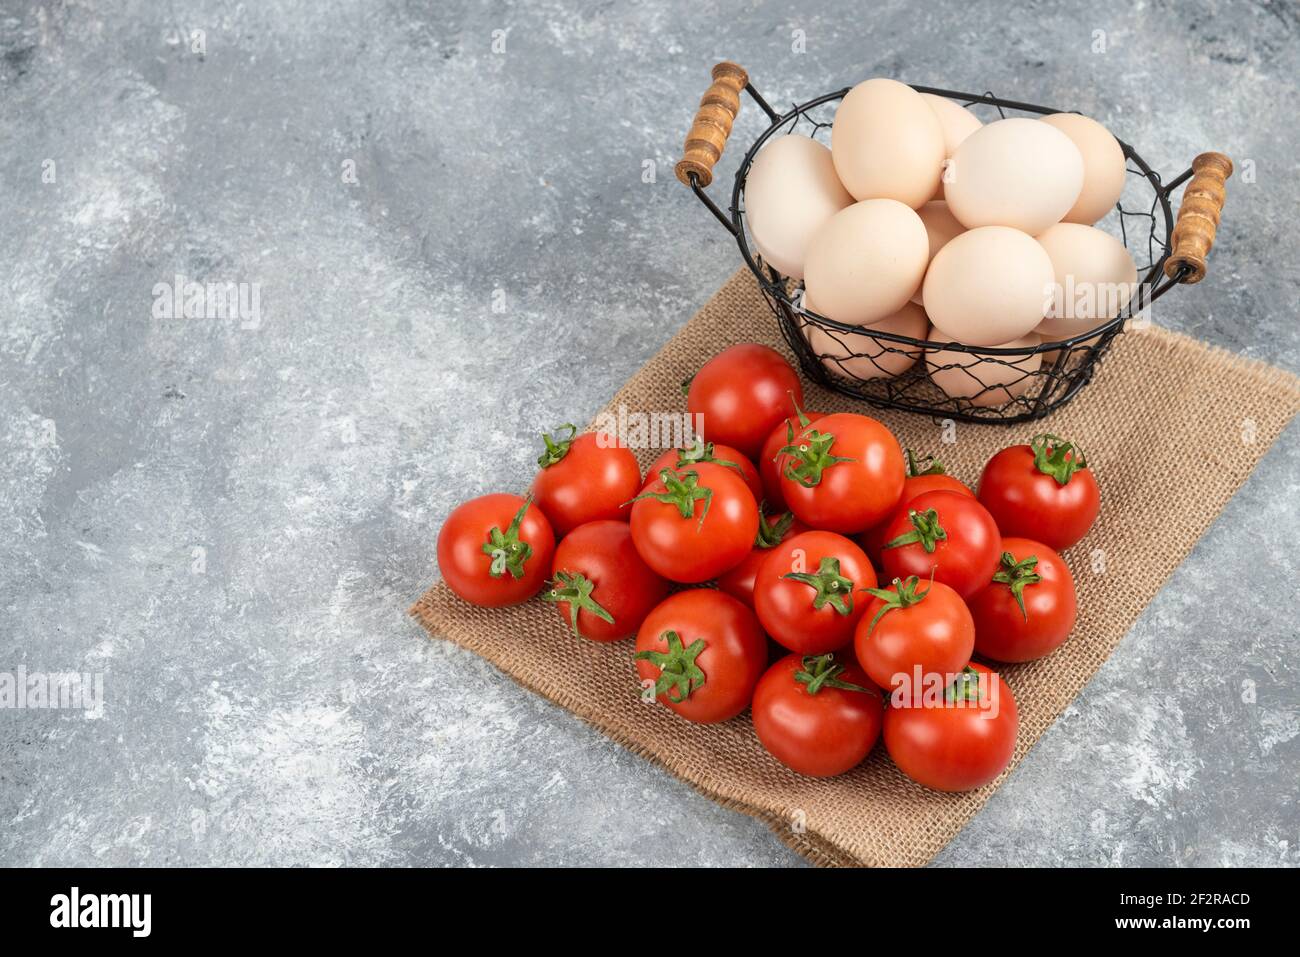 Basket of fresh uncooked eggs and ripe tomatoes on marble background Stock Photo